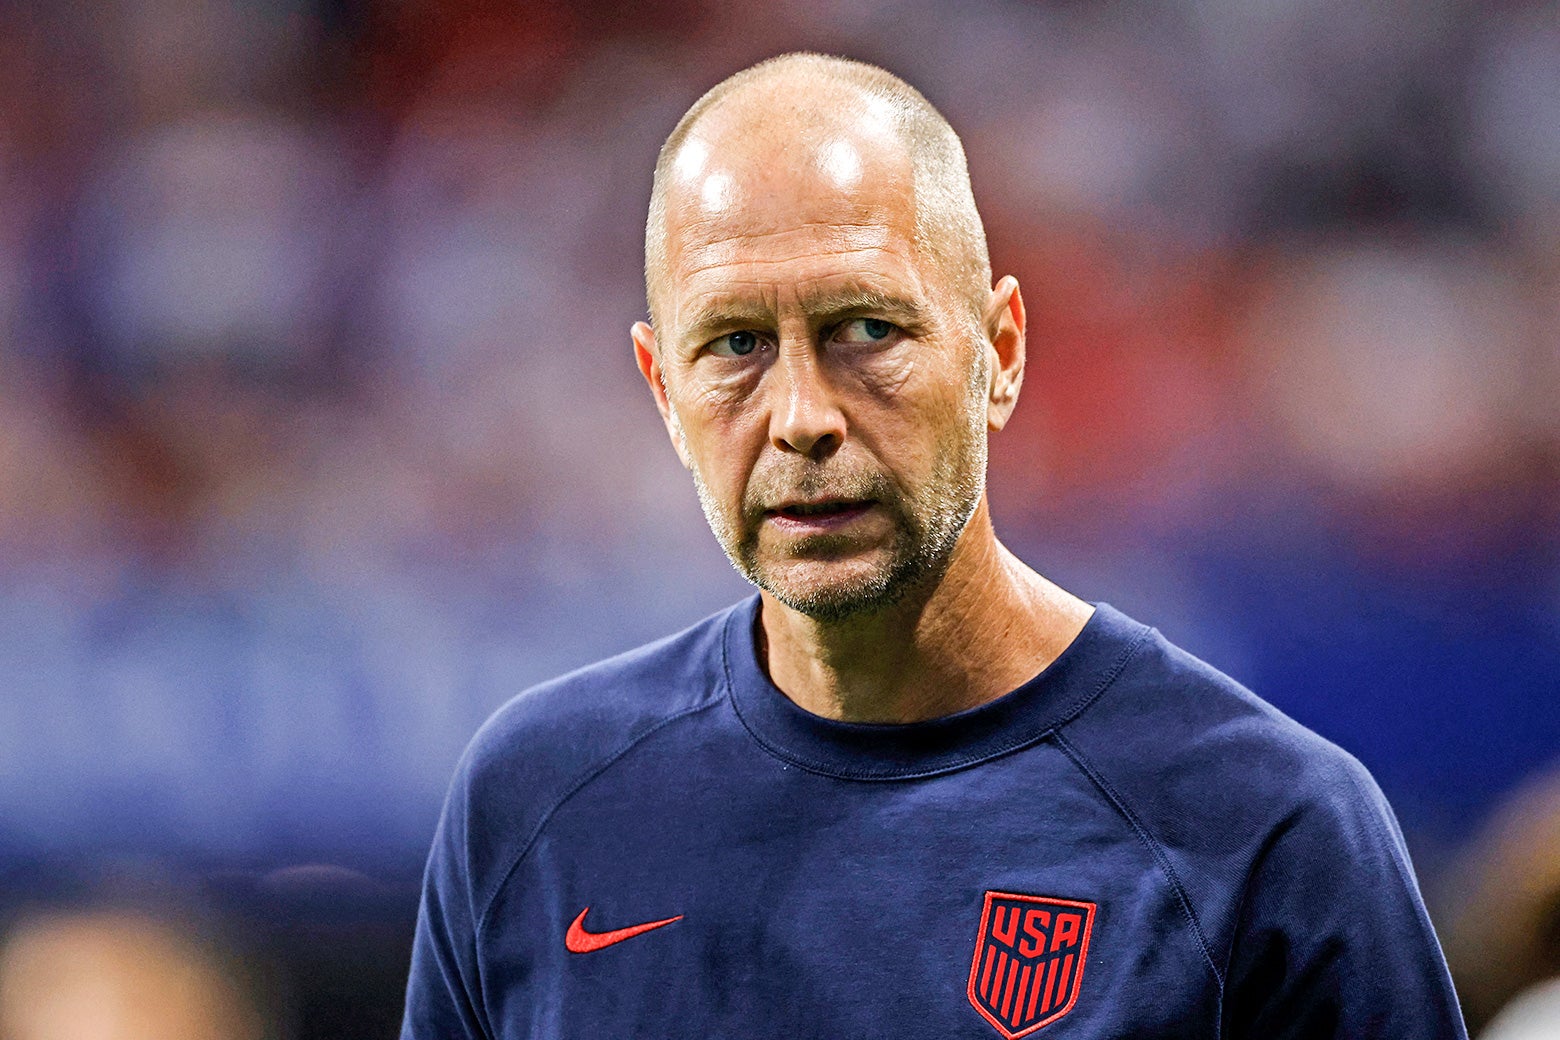 U.S. Men’s Soccer Fans Are Spiraling From This Week’s Huge News. They Need to Get a Grip.